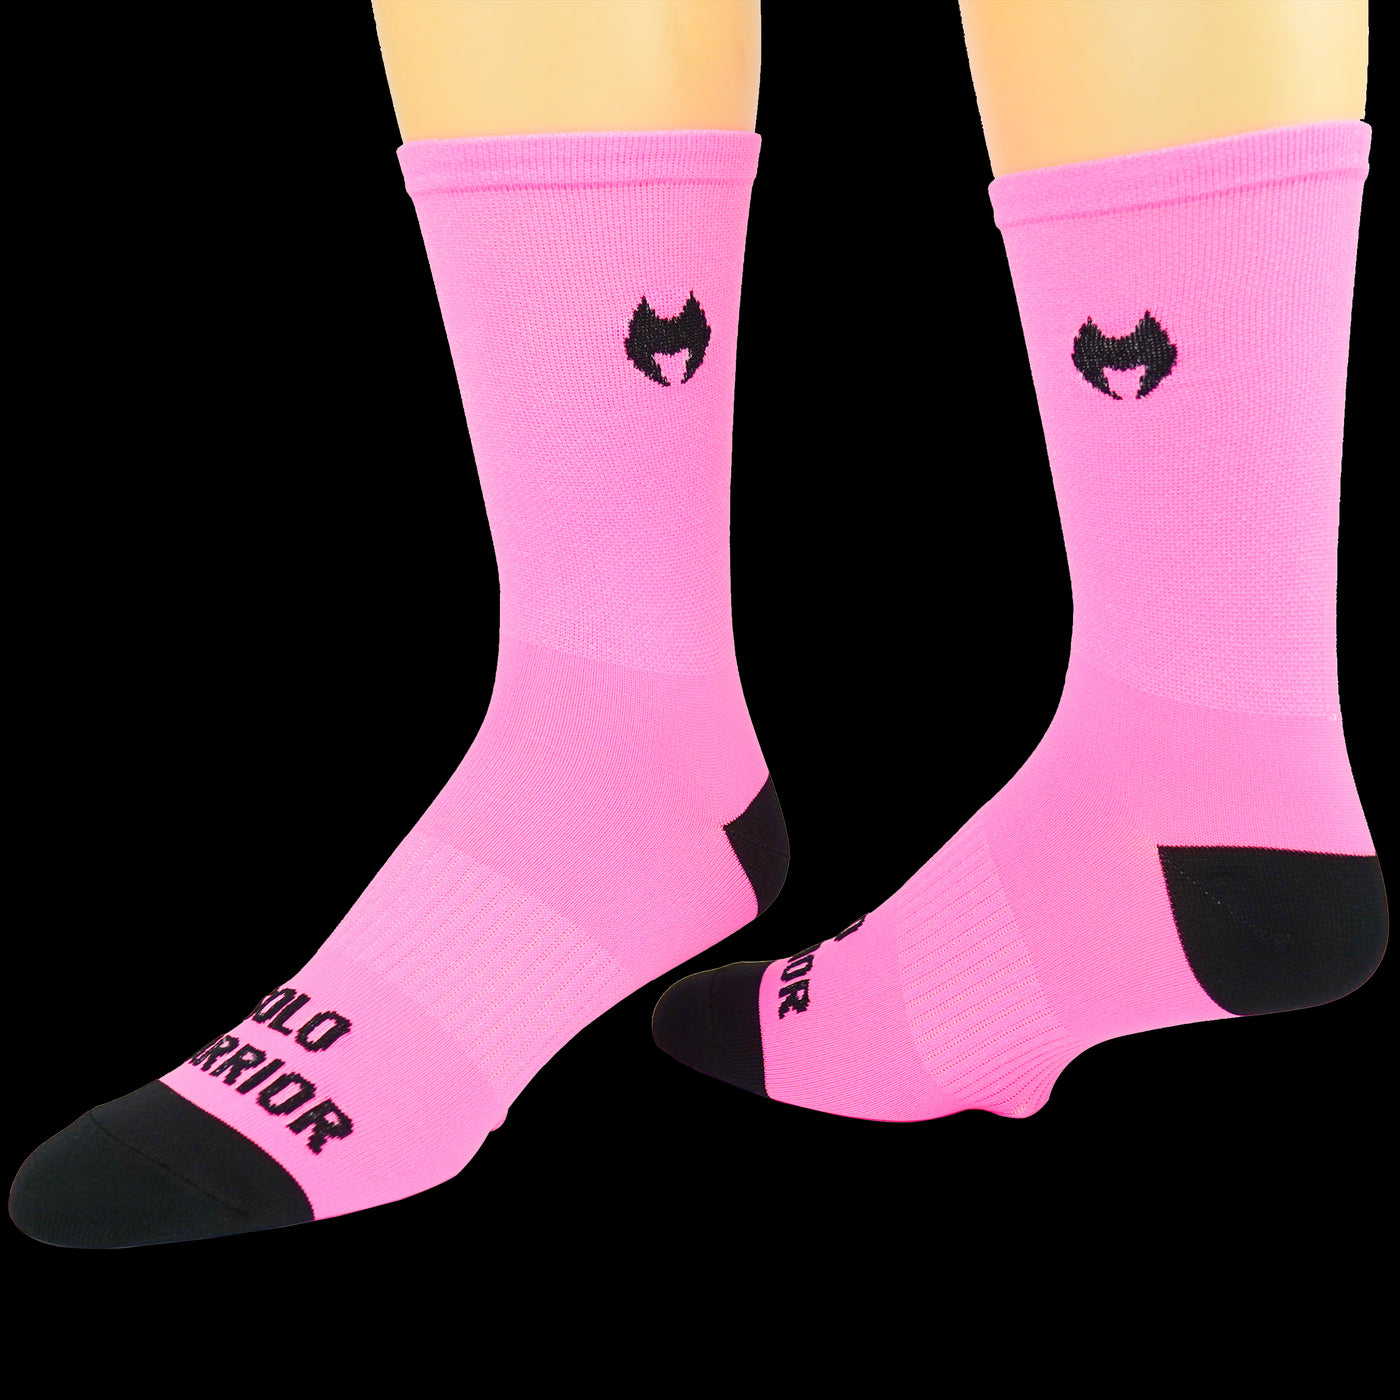 The New 2.0 6” Men’s and Women’s, Solid Fluorescent Pink, Compression, Cycling socks.